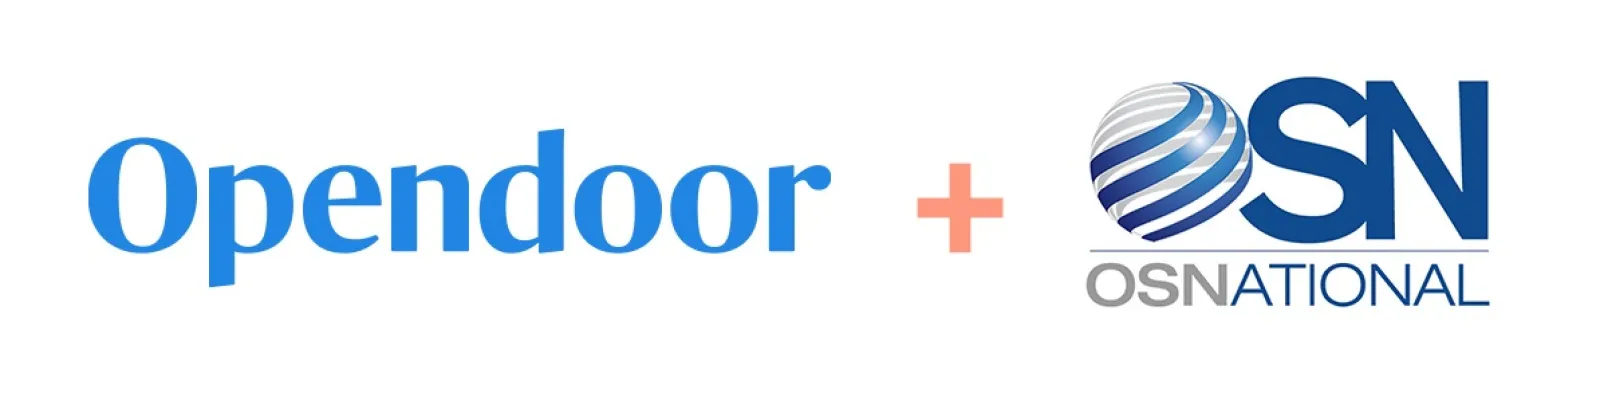 Opendoor Acquires Title and Escrow Company OS National